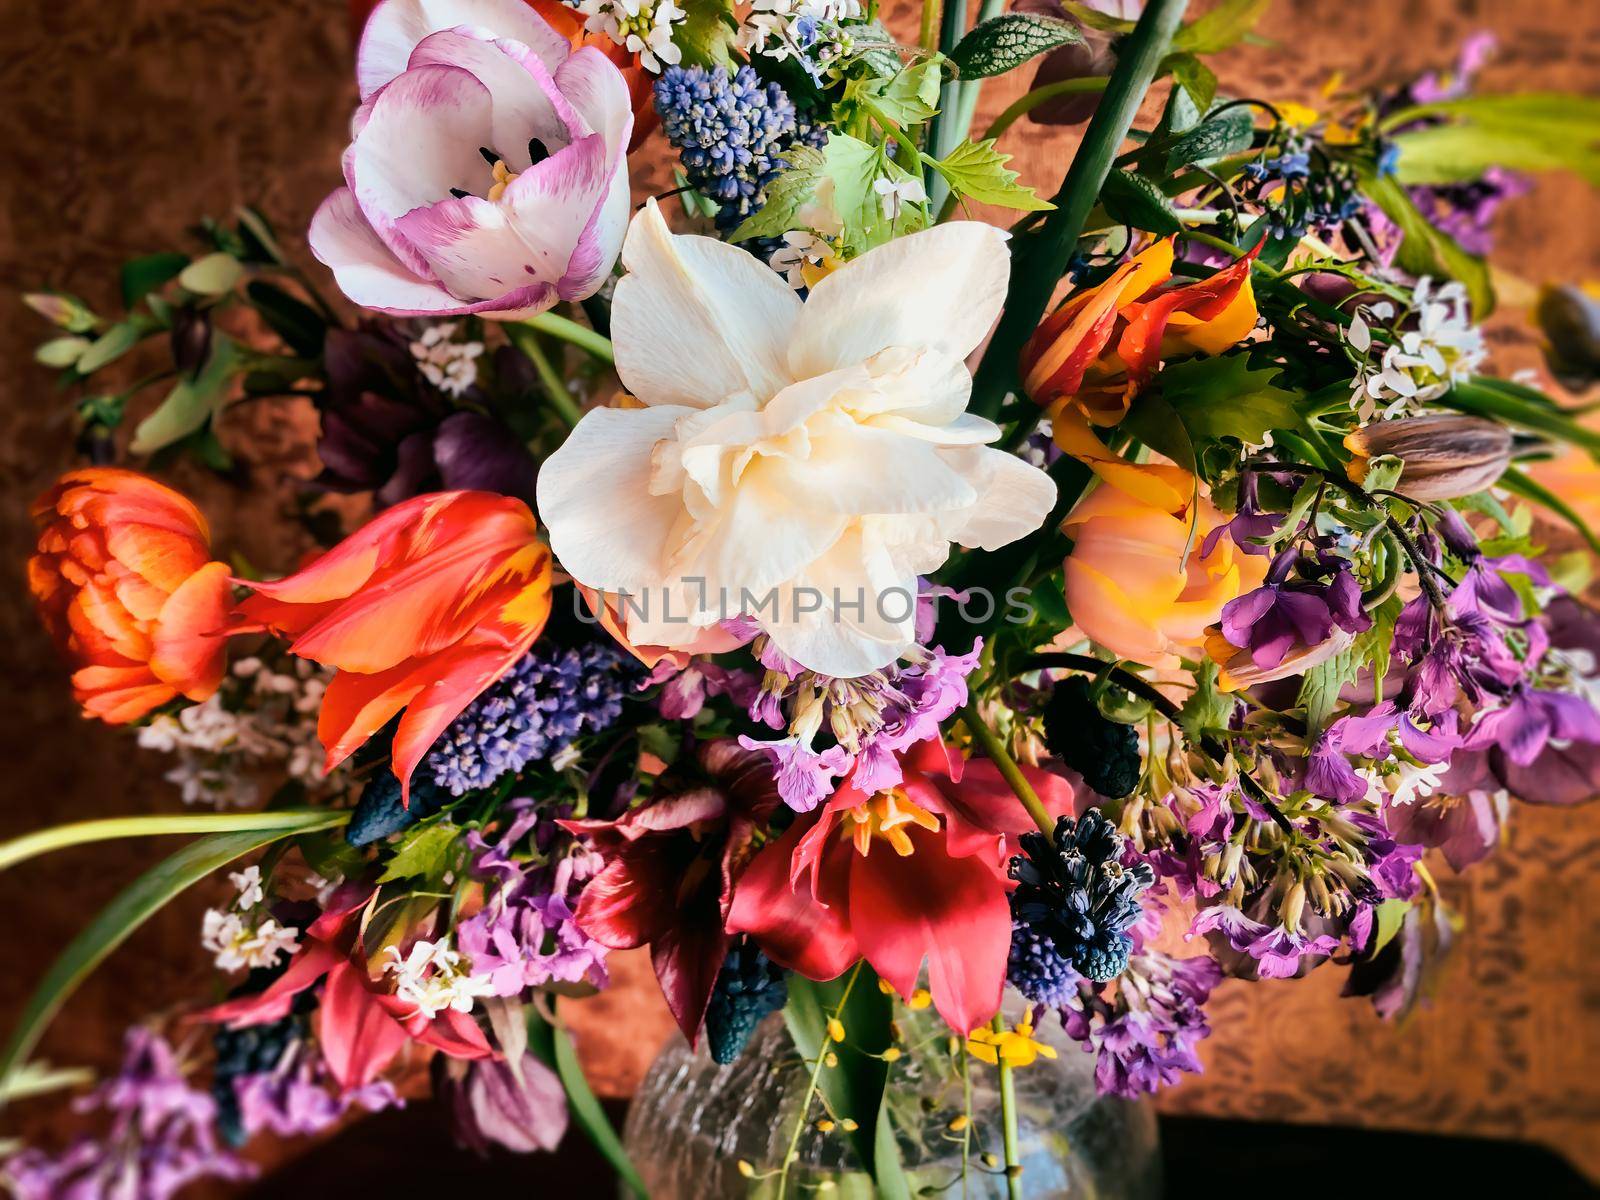 Home decor and the art of arranging bouquets. Bouquet of colorful garden flowers. The composition includes tulips, daffodils, muscari, lunaria, fritillaria and hellebore